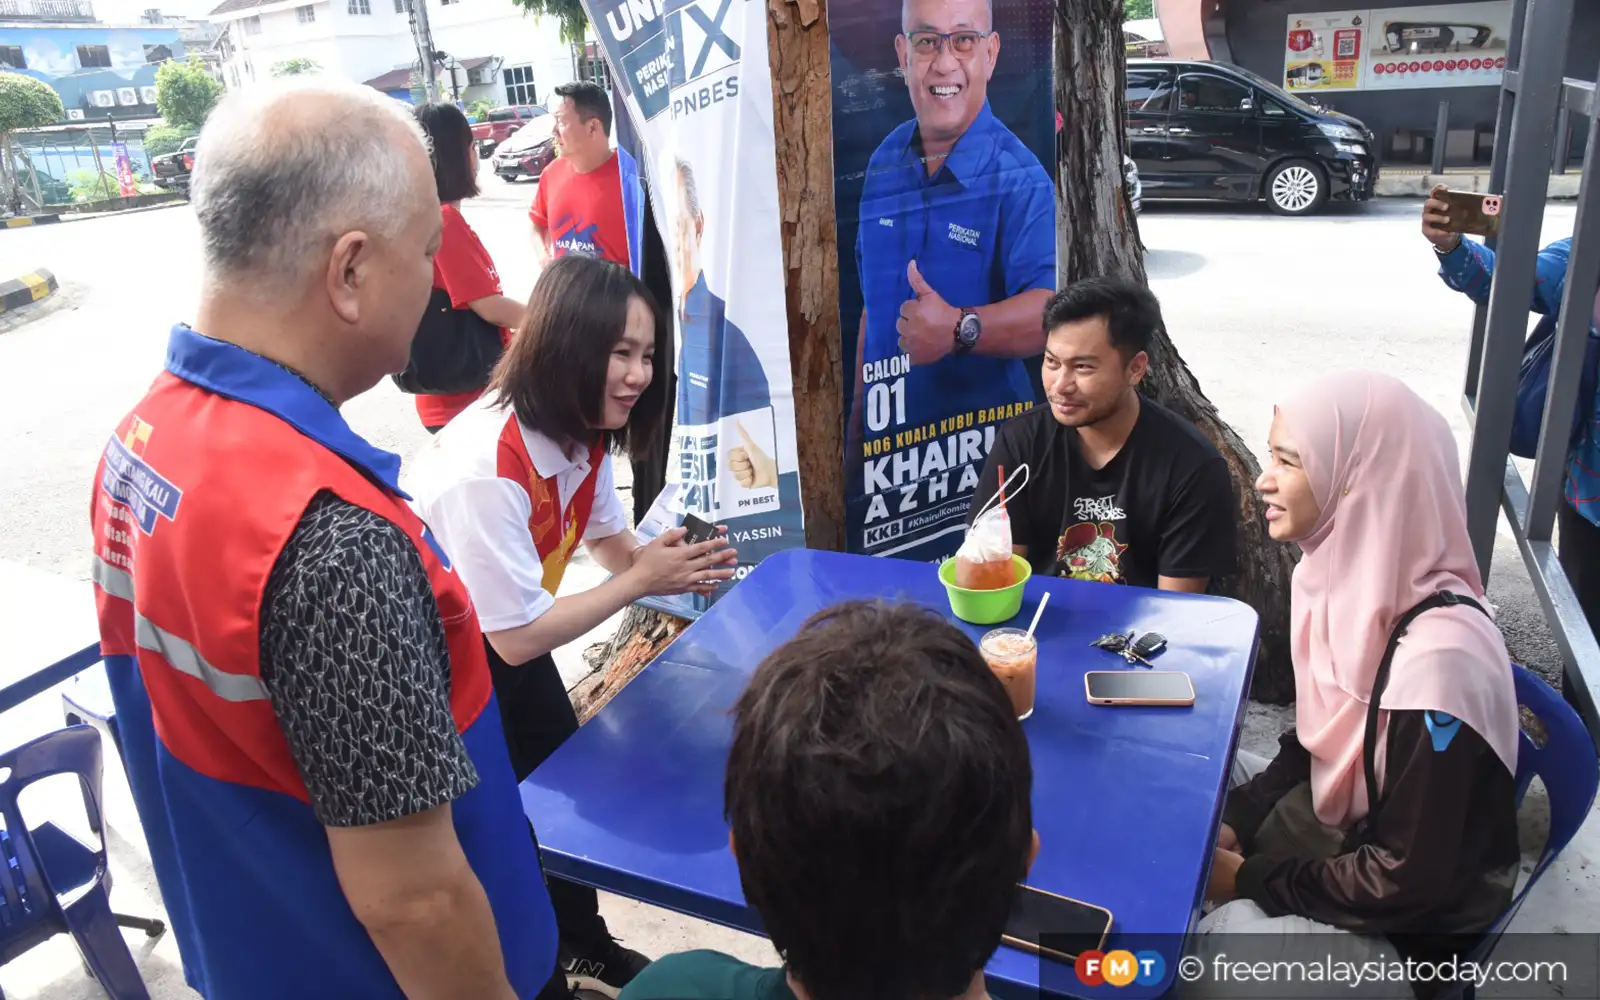 friction over candidate threatening ph’s kkb campaign?